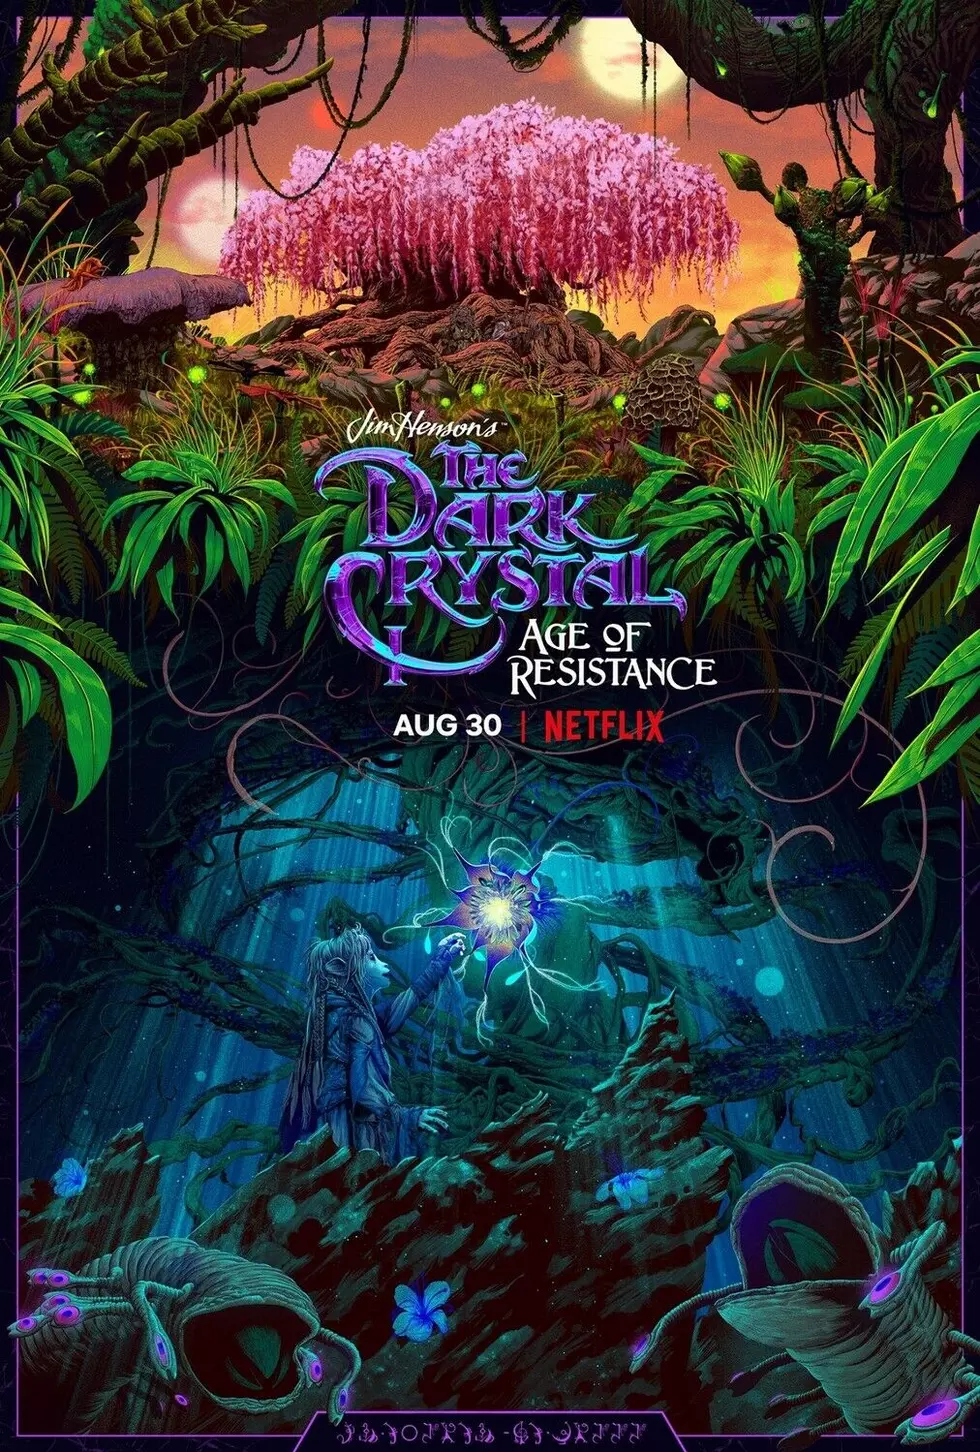 New Trailer for ‘The Dark Crystal: Age of Resistance’ [VIDEO]